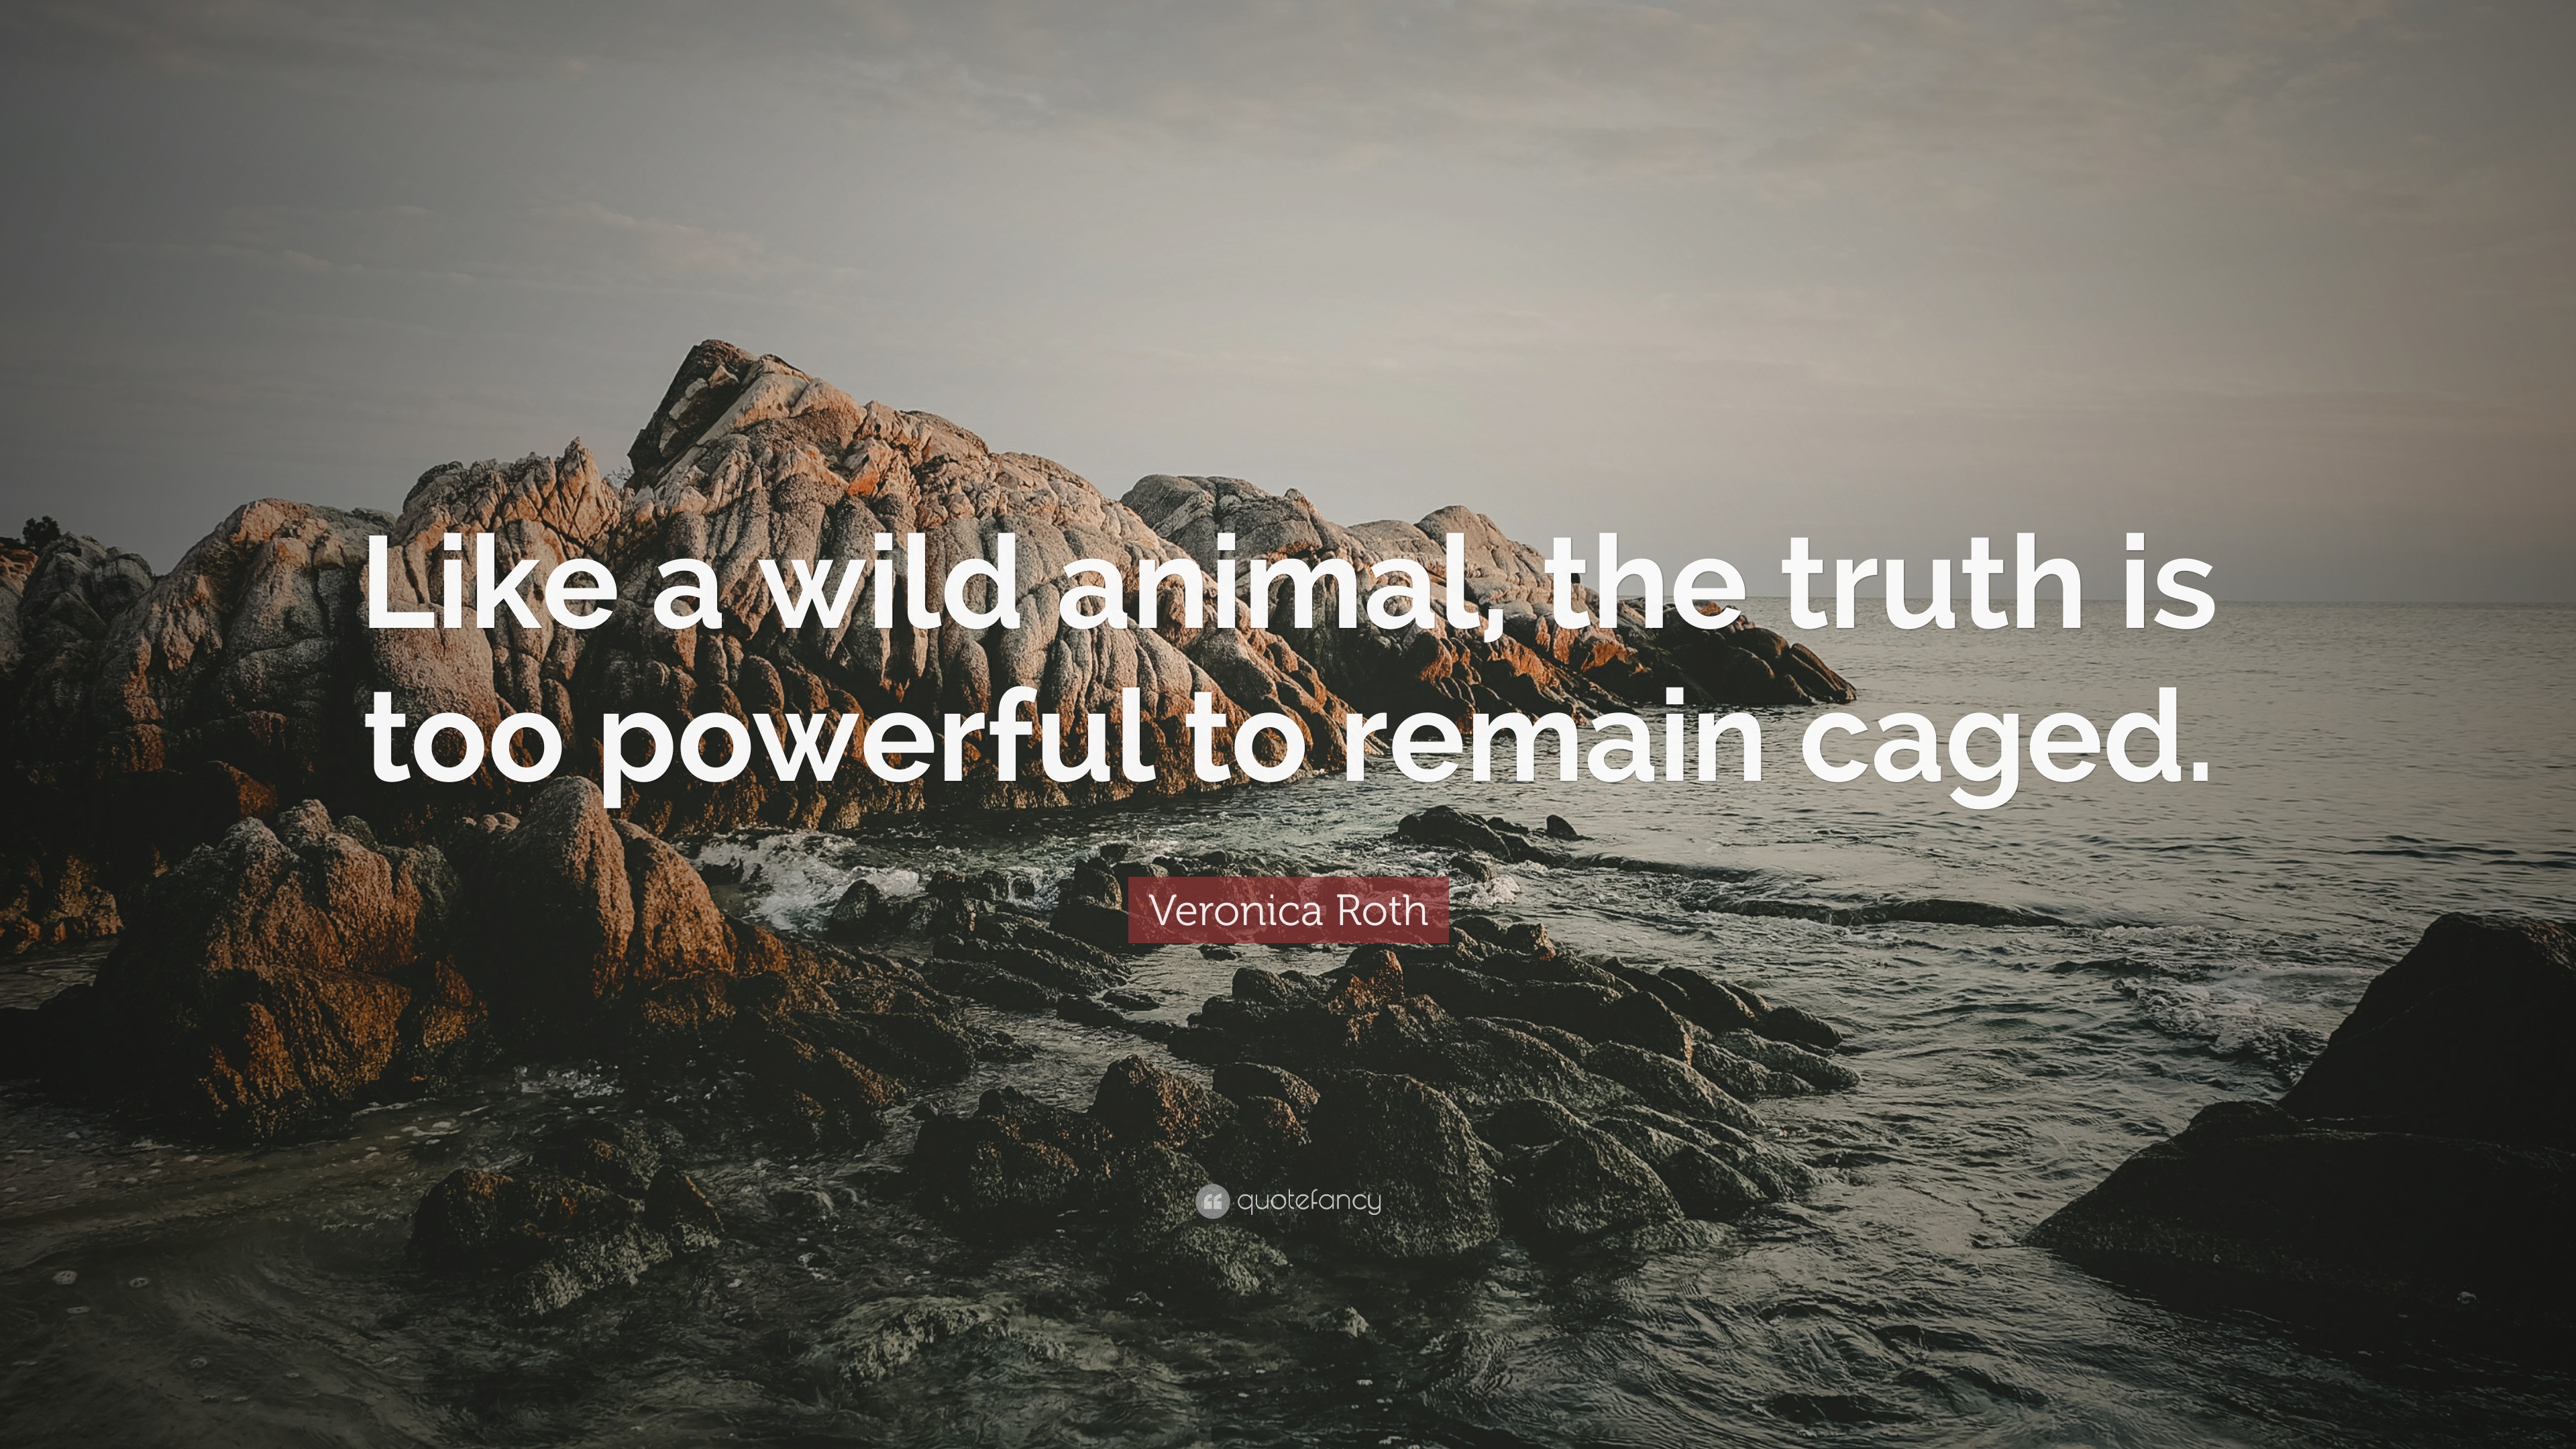 Veronica Roth Quote: “Like a wild animal, the truth is too powerful to  remain caged.”